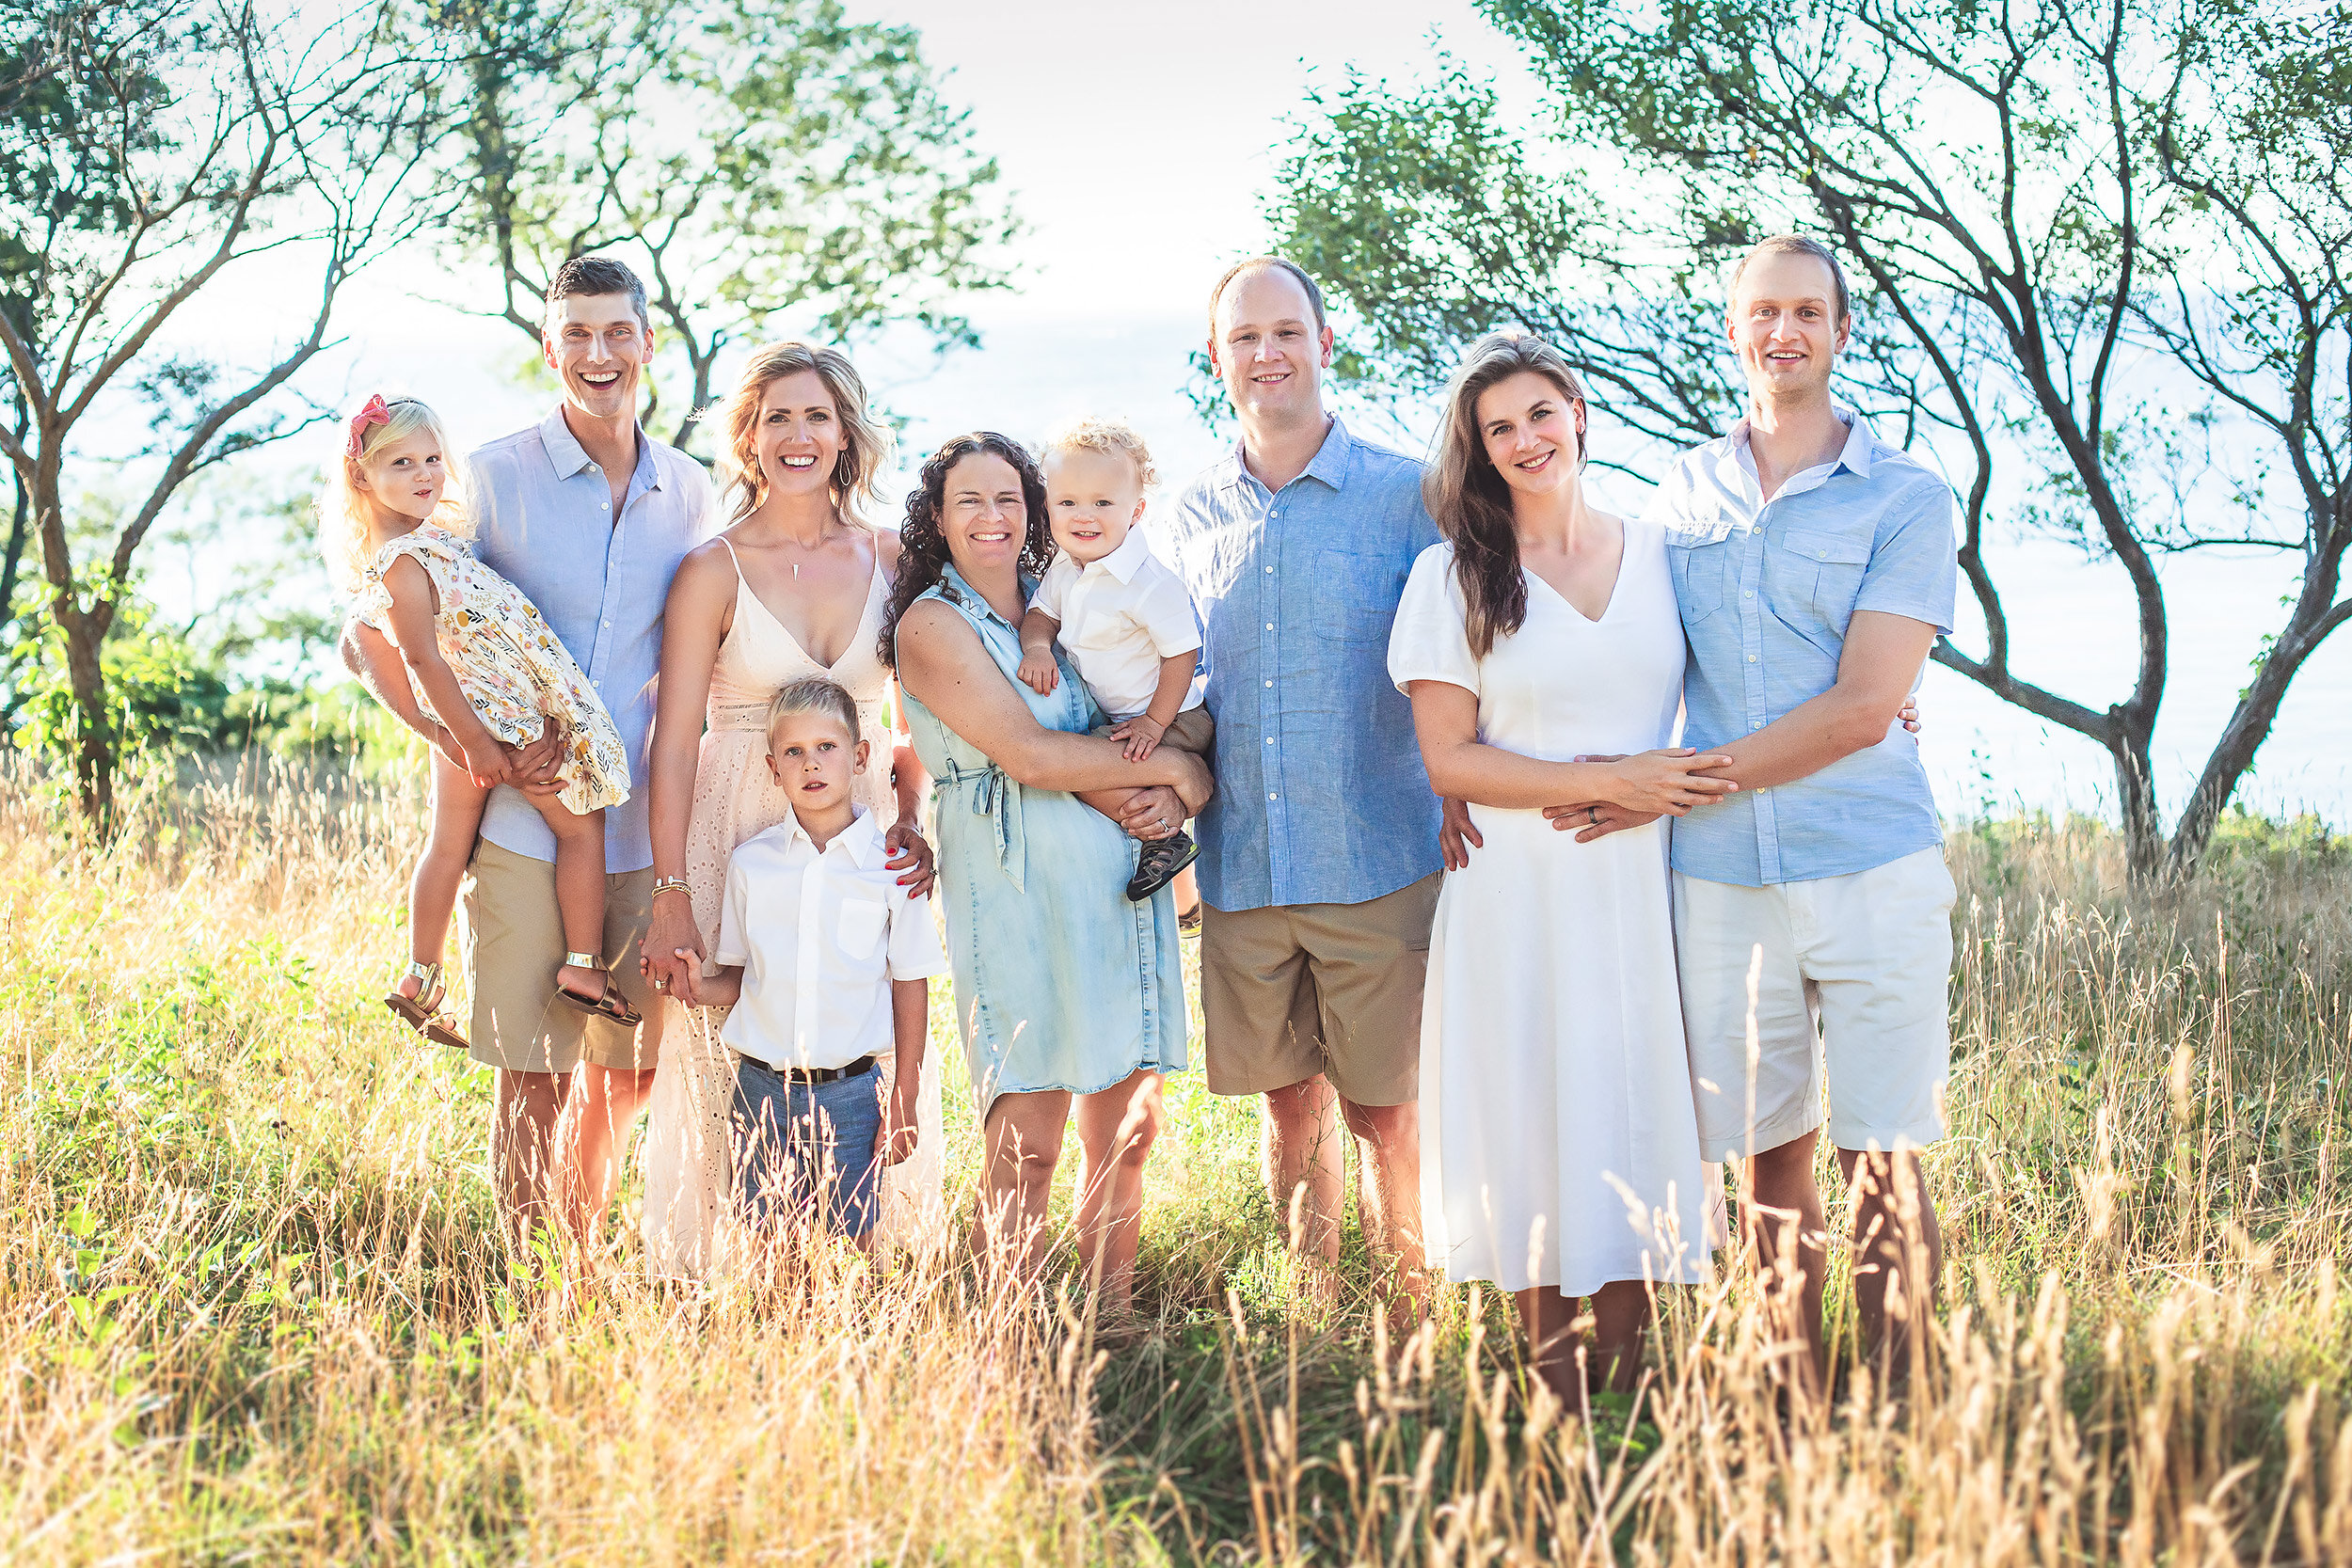 Andover Family Portrait | Stephen Grant Photography